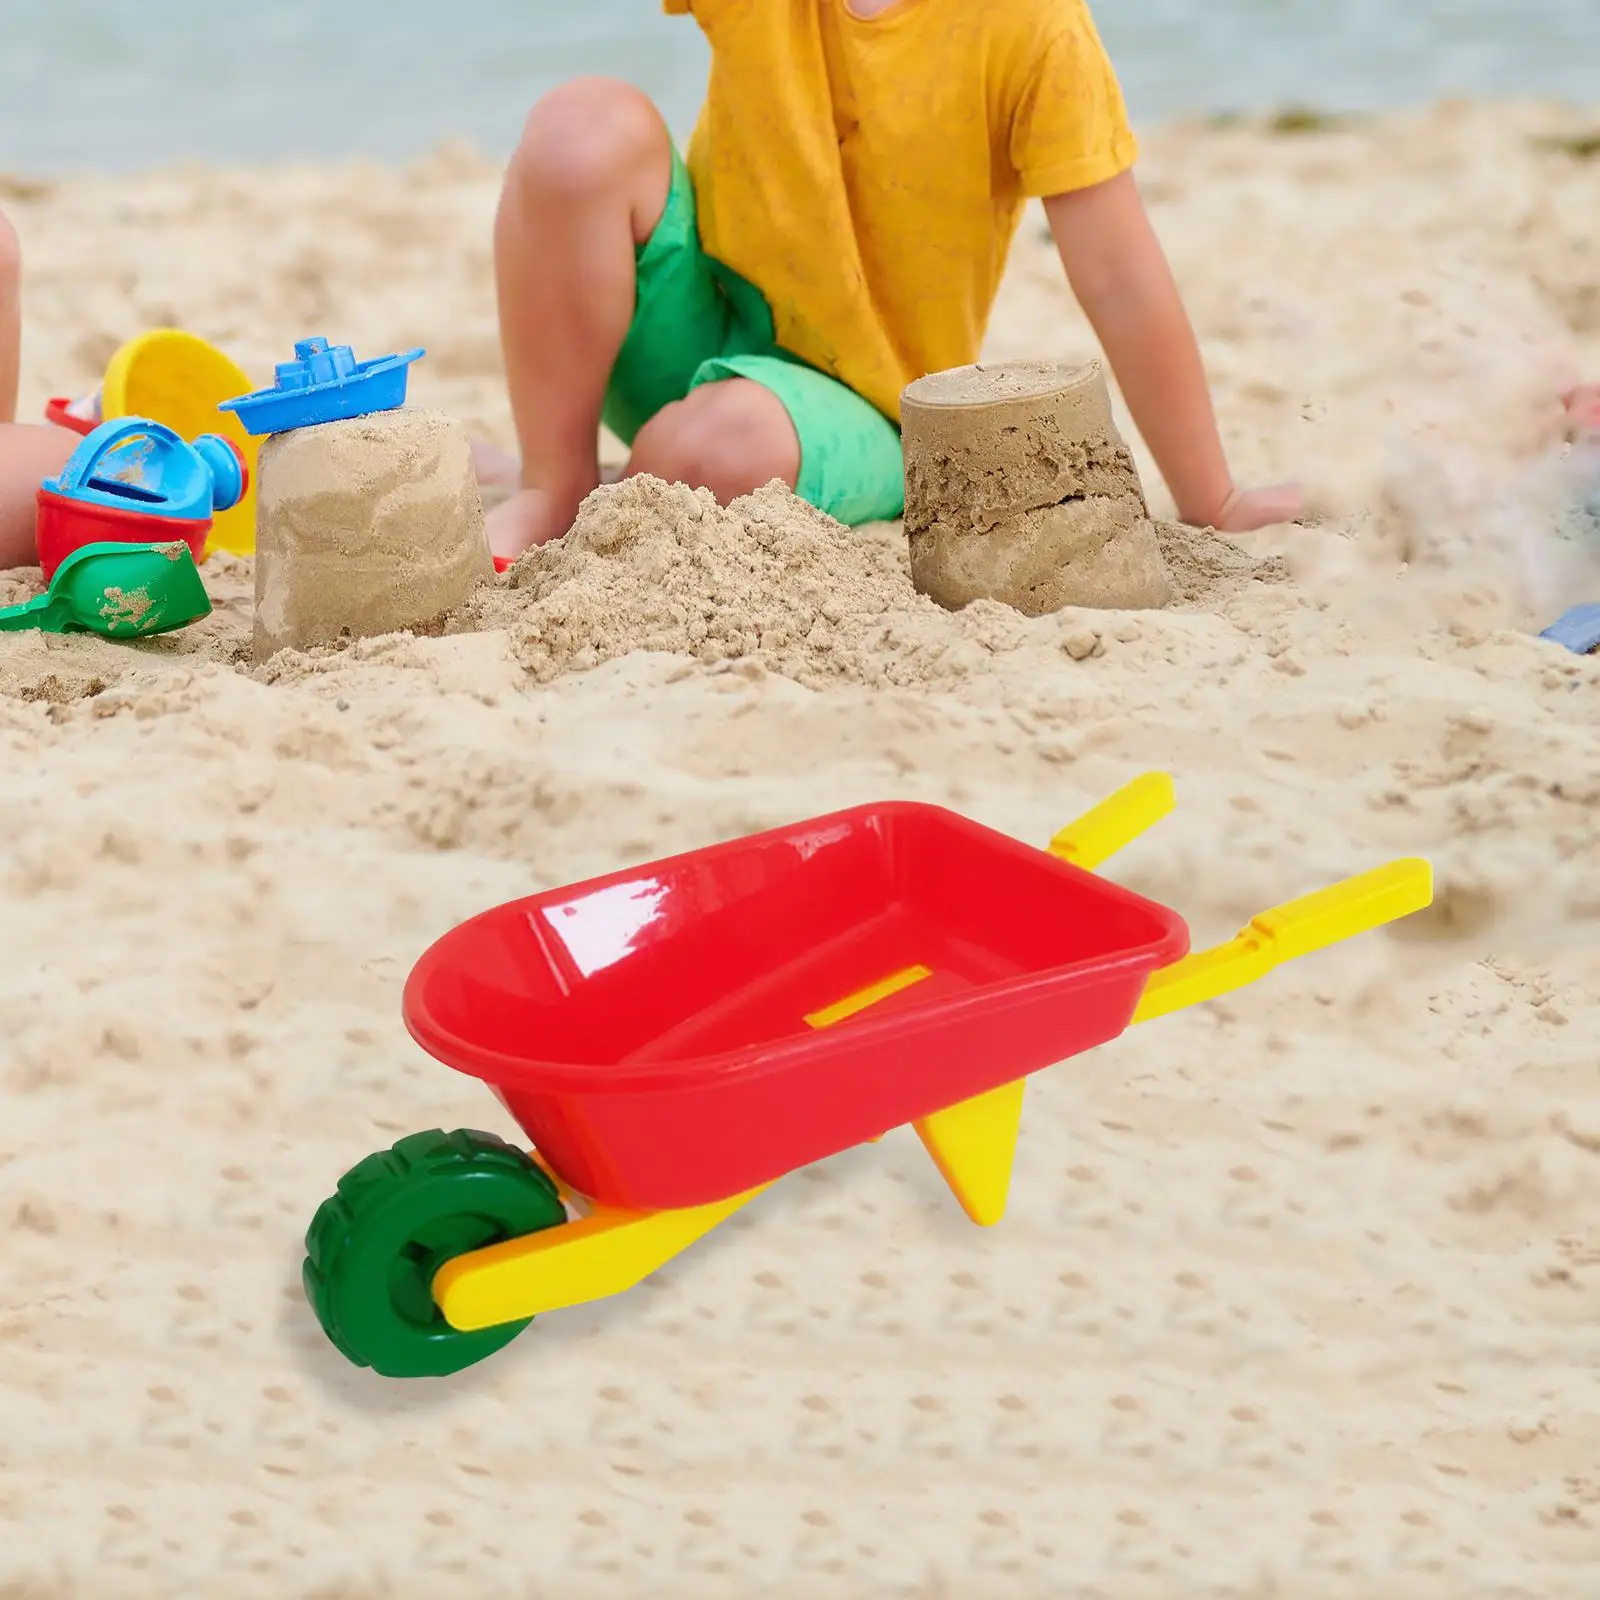 Sand Wheelbarrow Toy Lightweight for Sand, Snow, Plant Transfer, Outdoor Beach Game Toy for Kids Yard Indoors and Outdoors